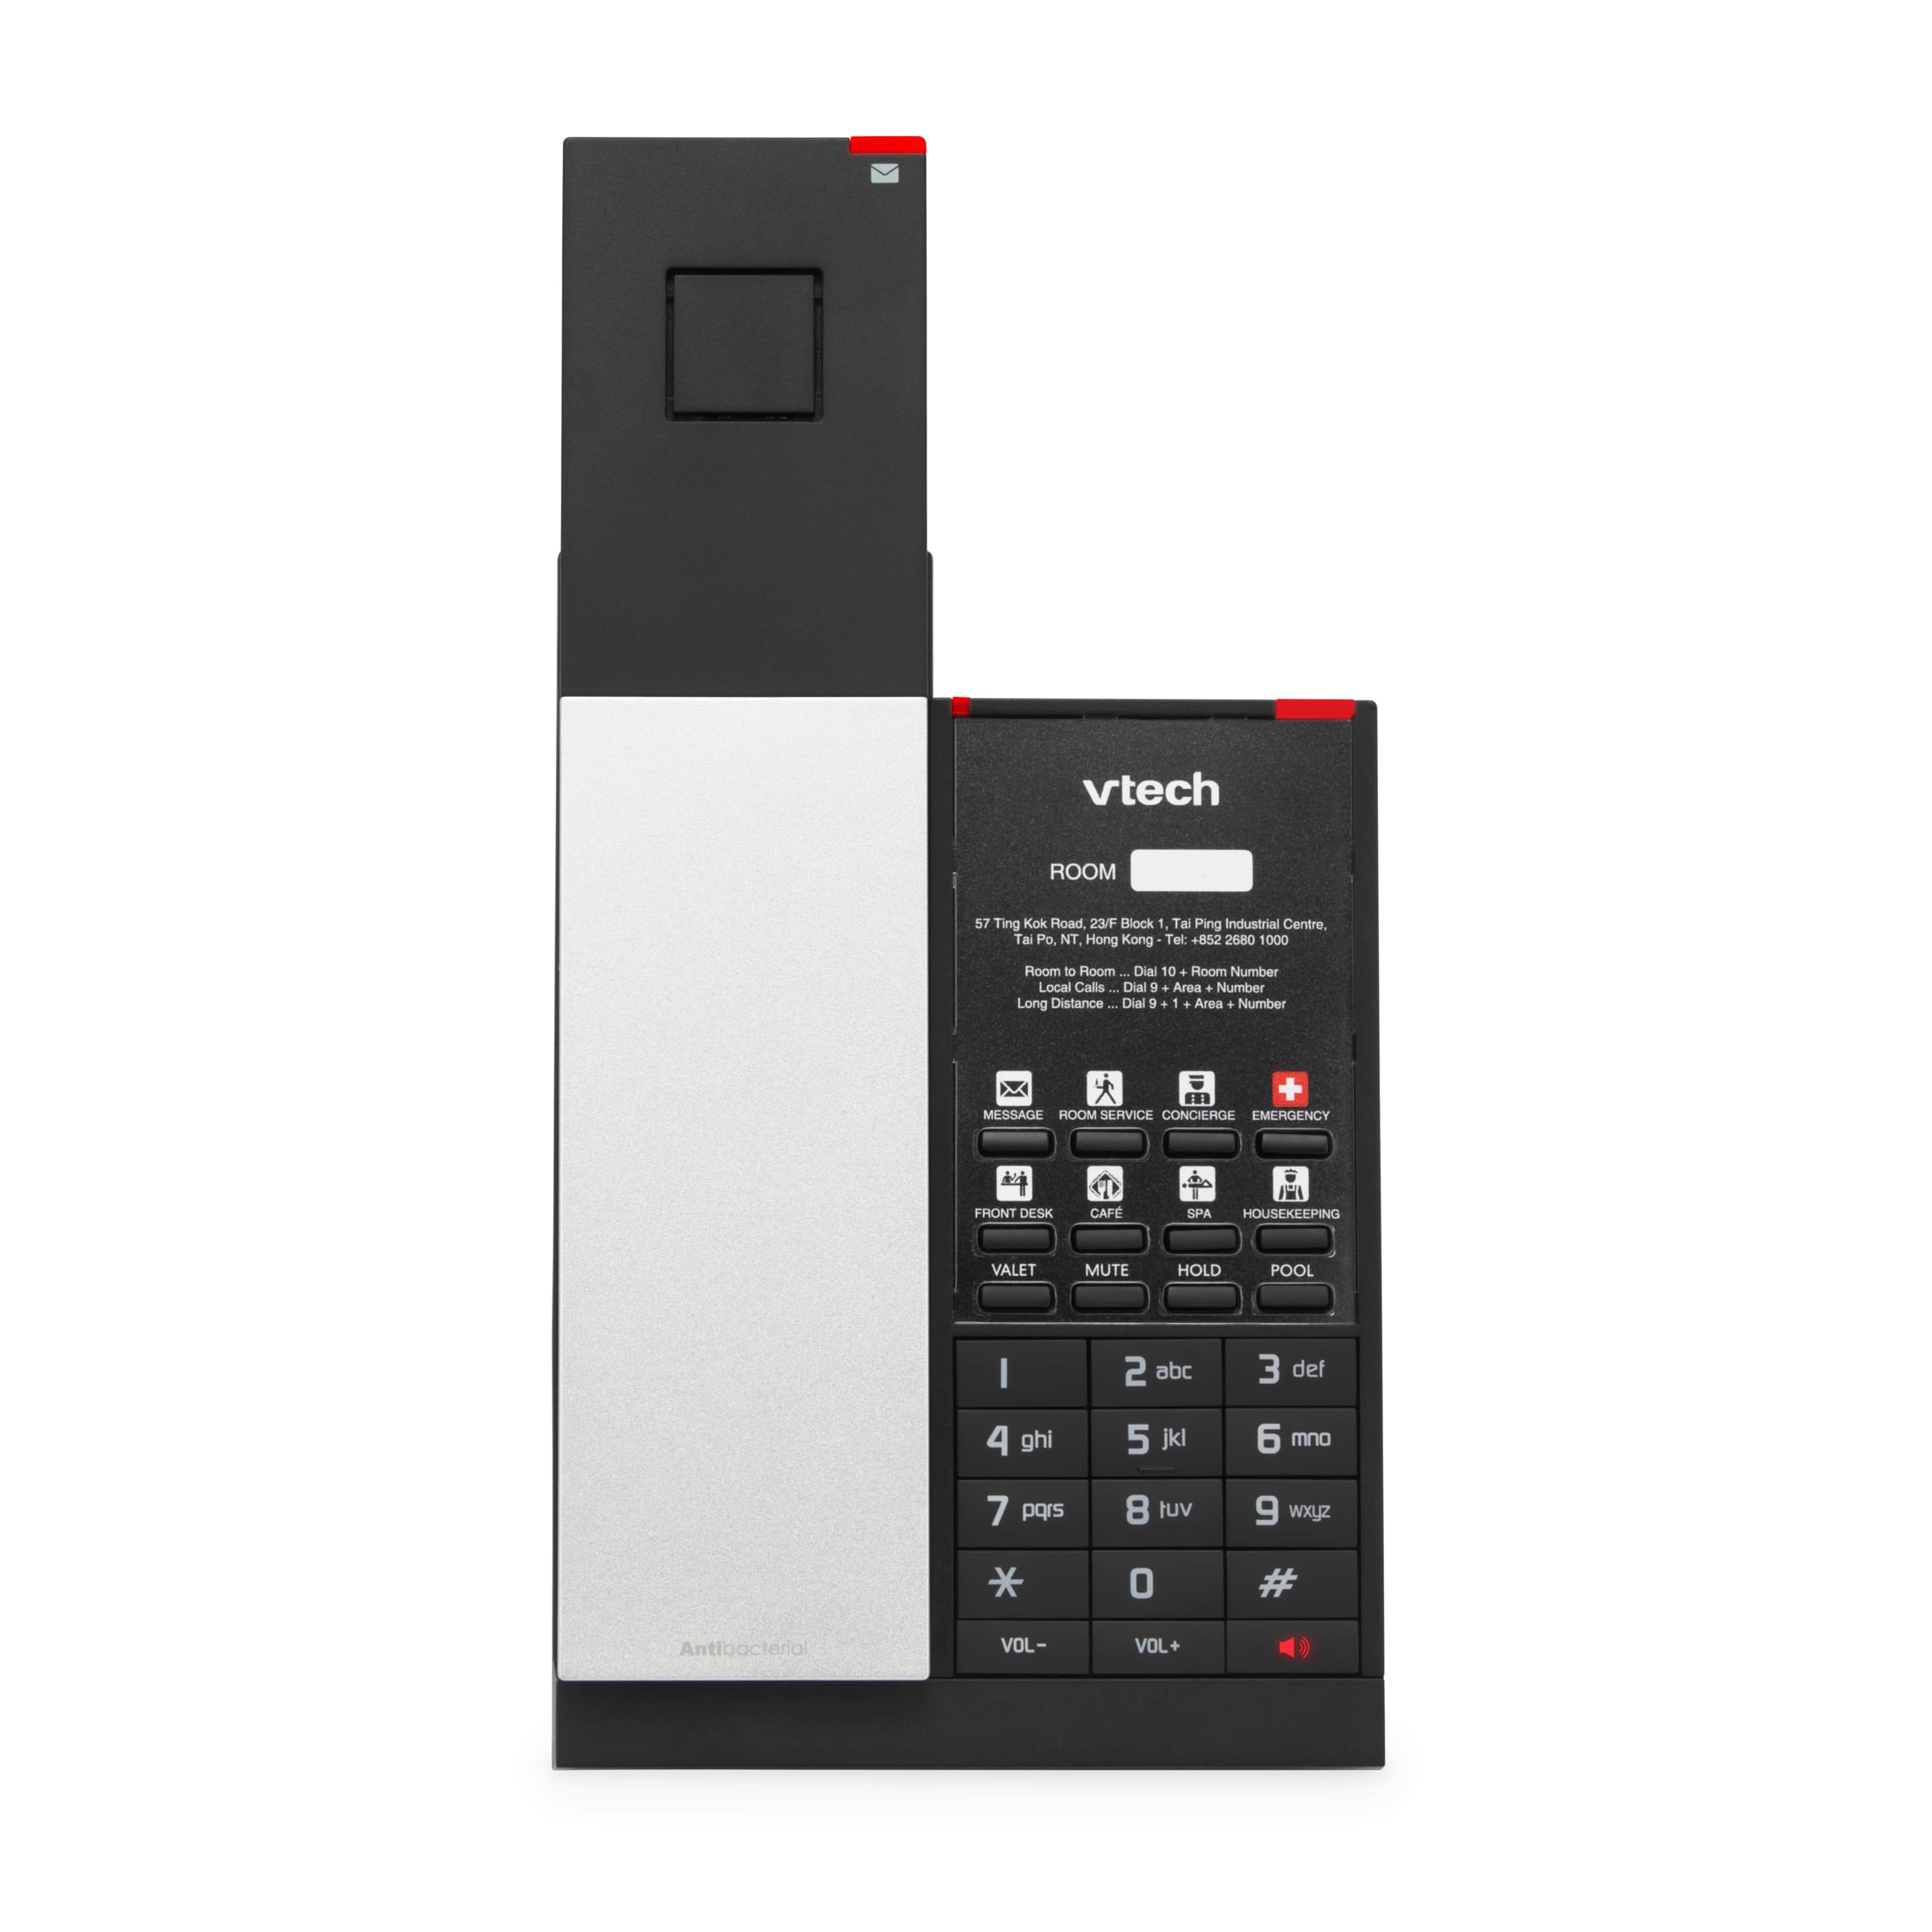 1-Line Analog Cordless Phone with Battery Backup - VTech® Hotel Phones